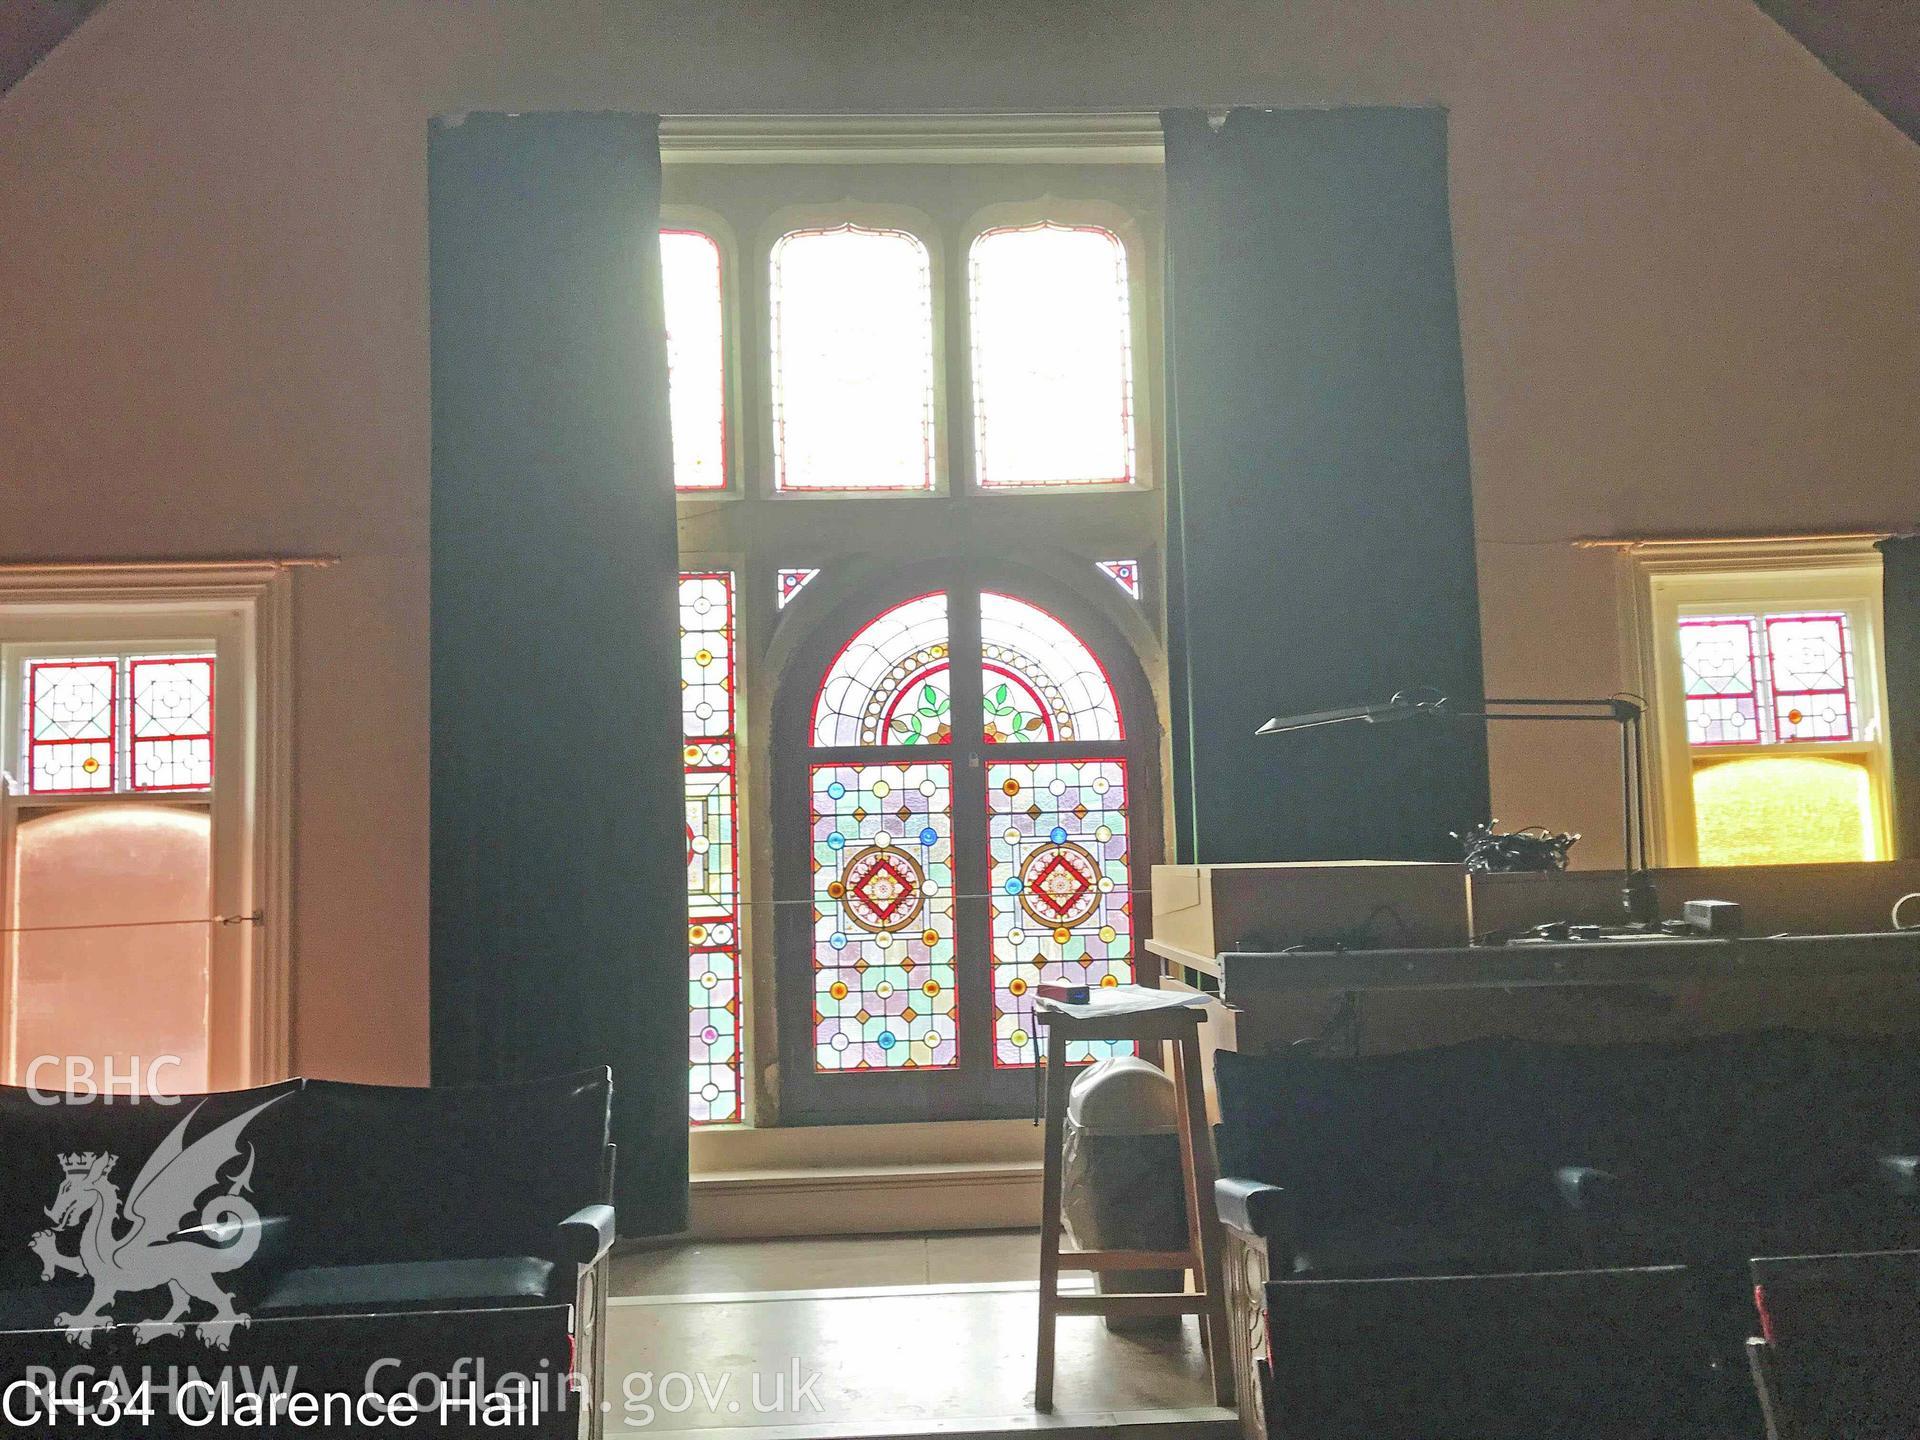 Photograph of The Clarence Hall, Crickhowell - interior, stained glass window, taken in 2019.